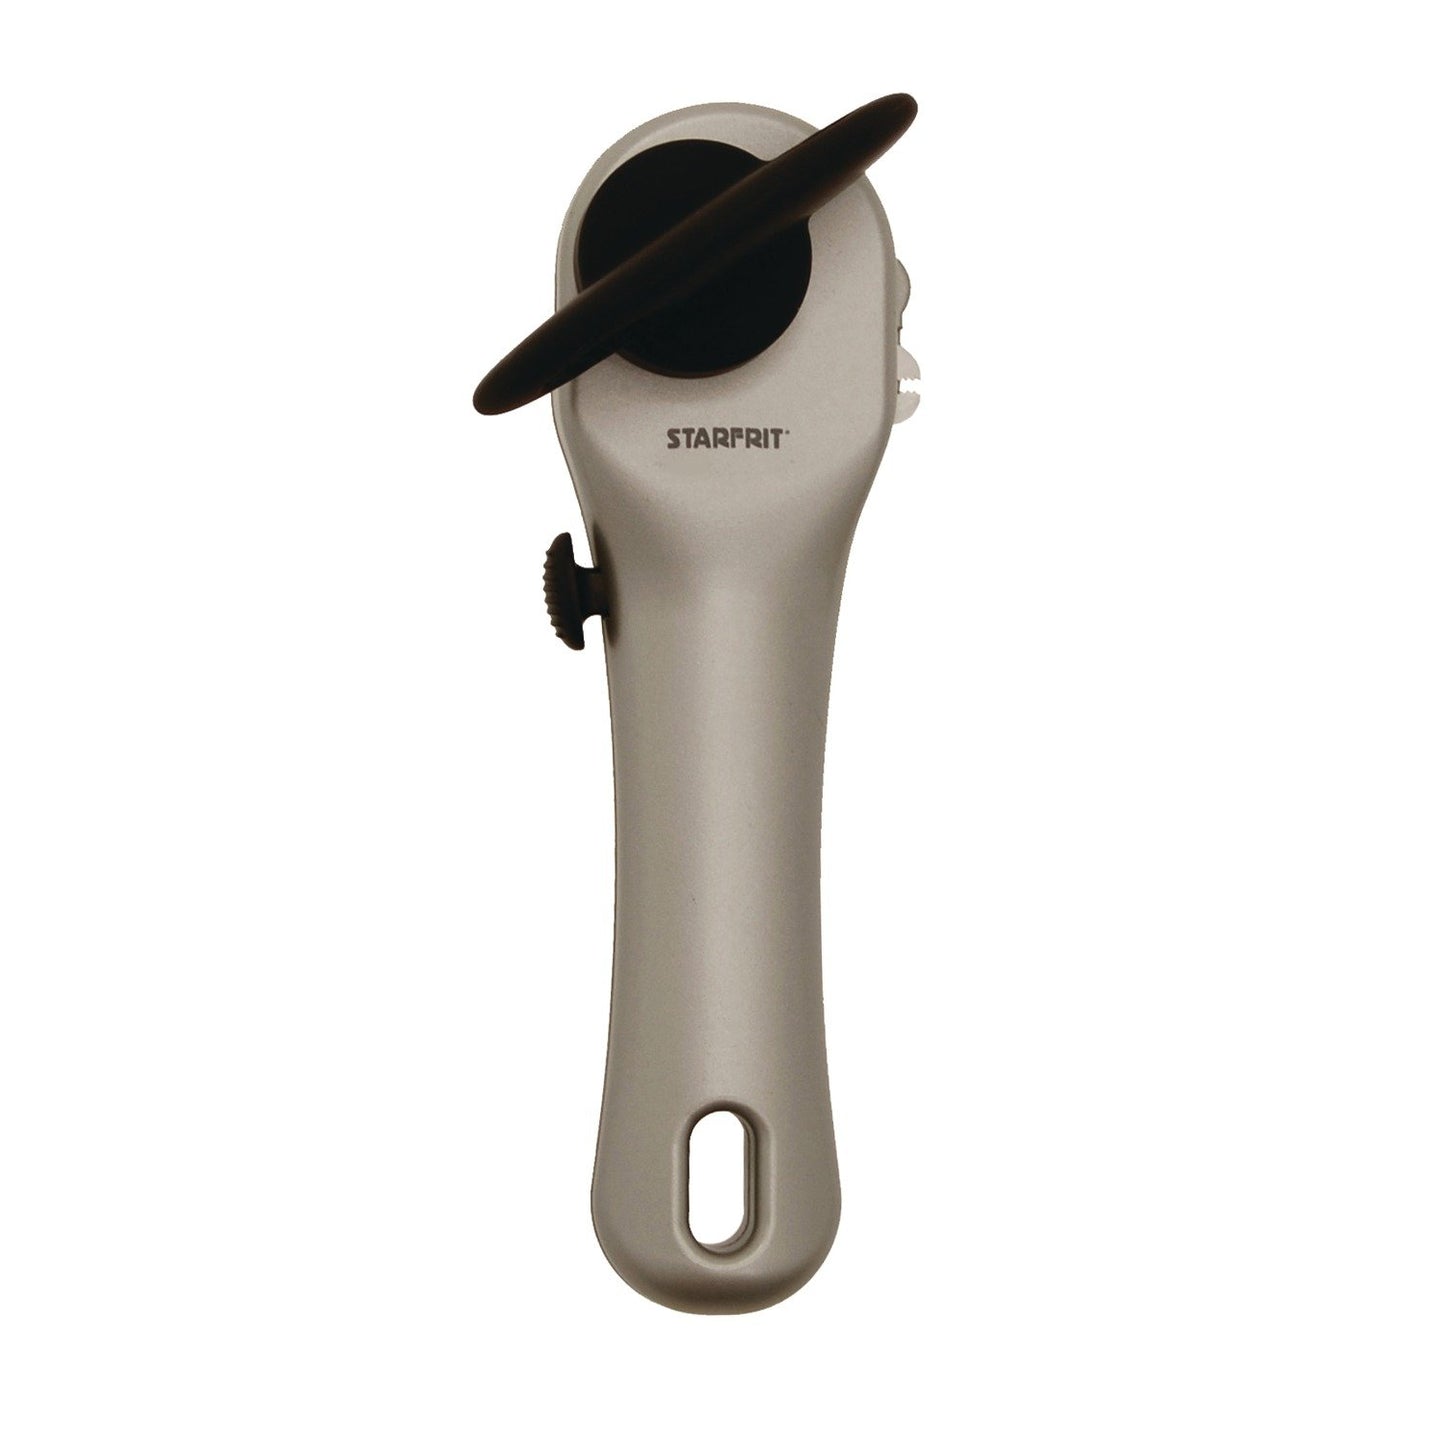 STARFRIT 93008-006-0000 Securimax Auto Can Opener